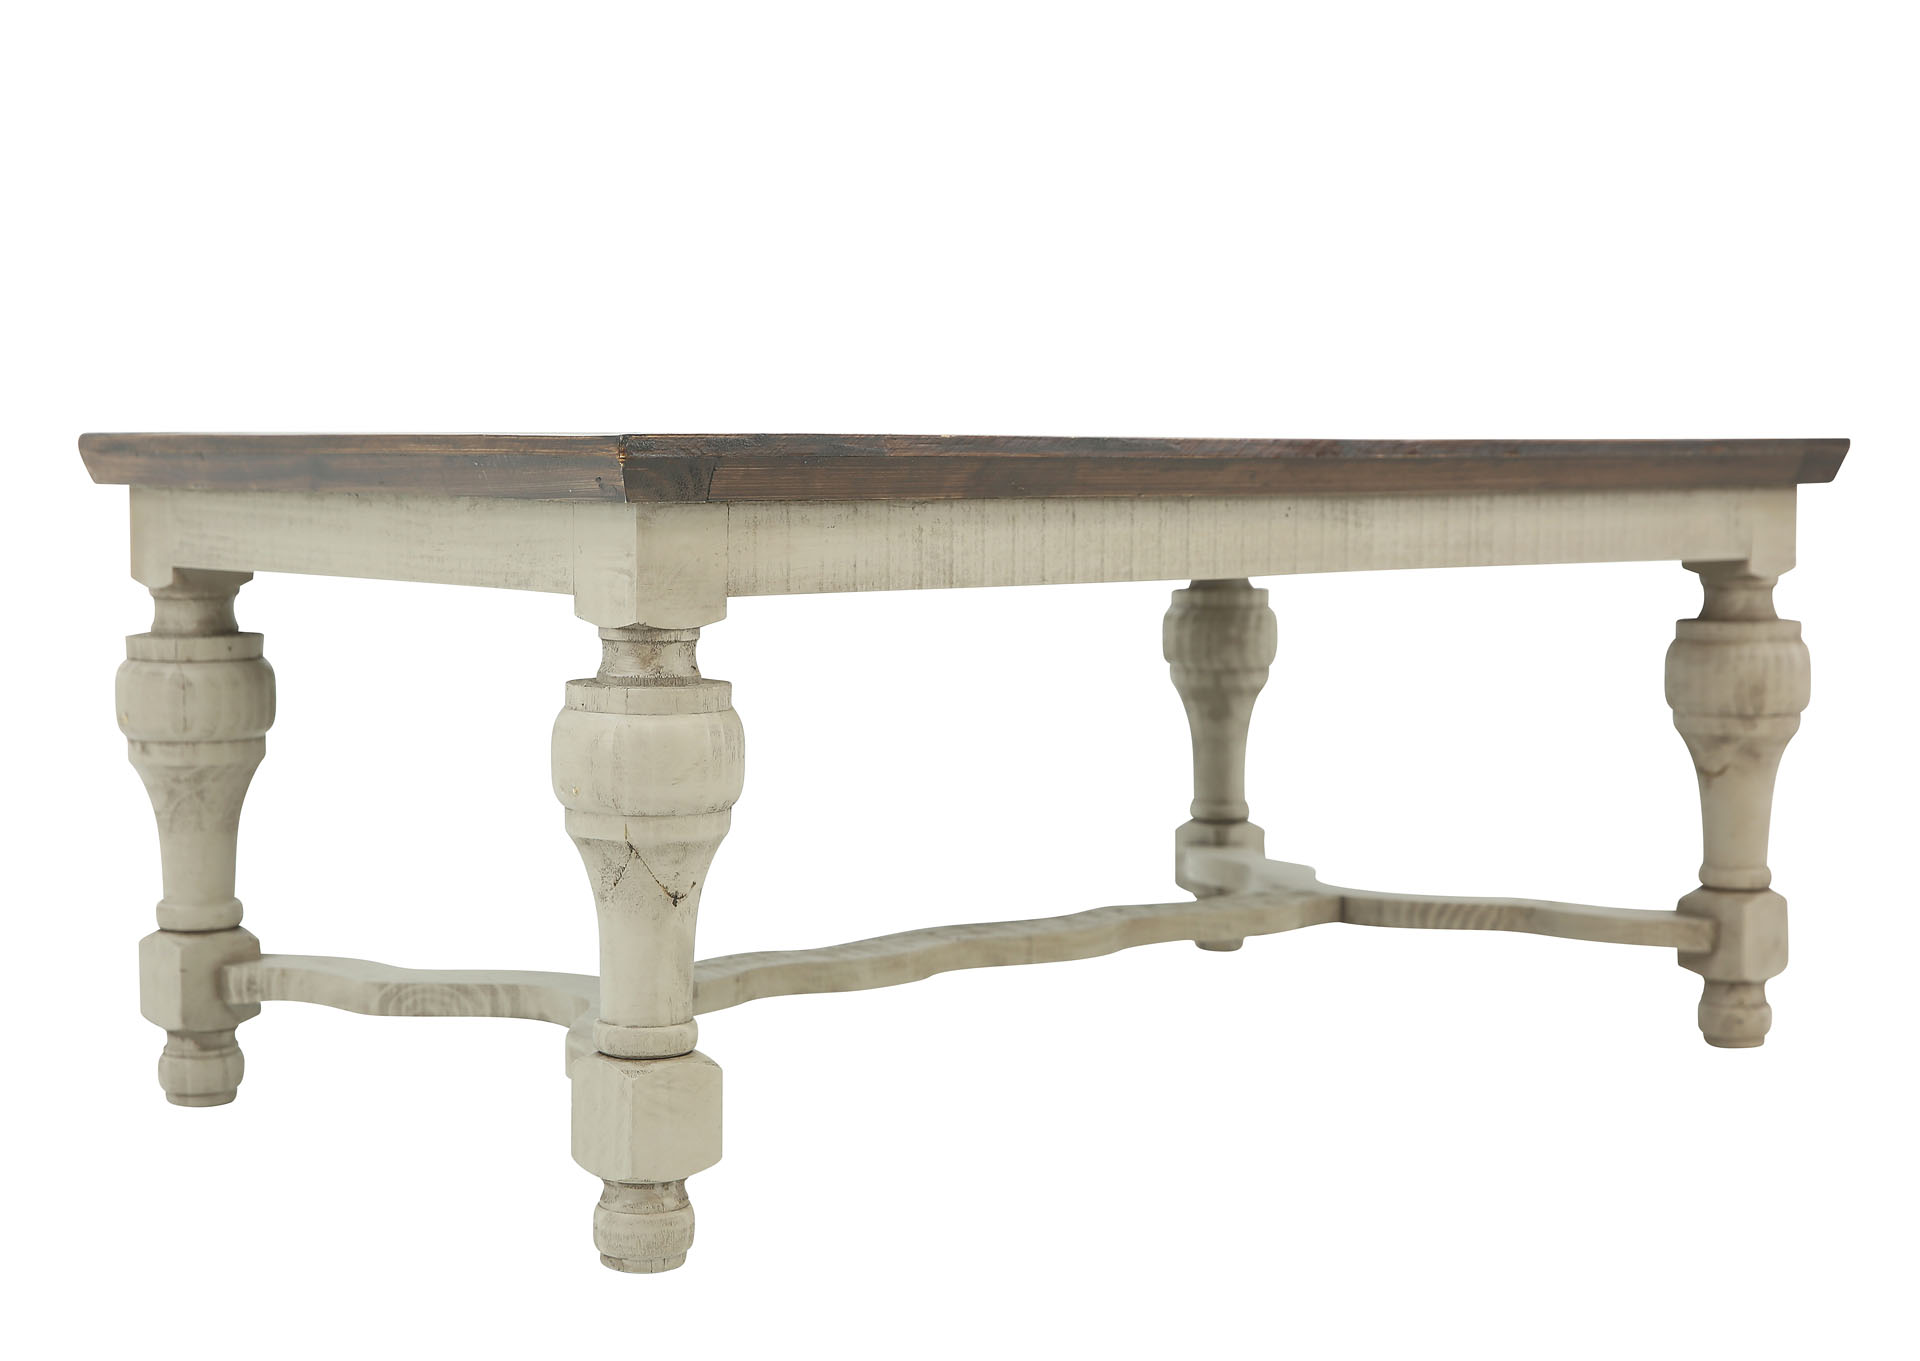 JAMISON COCKTAIL TABLE,RUSTIC IMPORTS